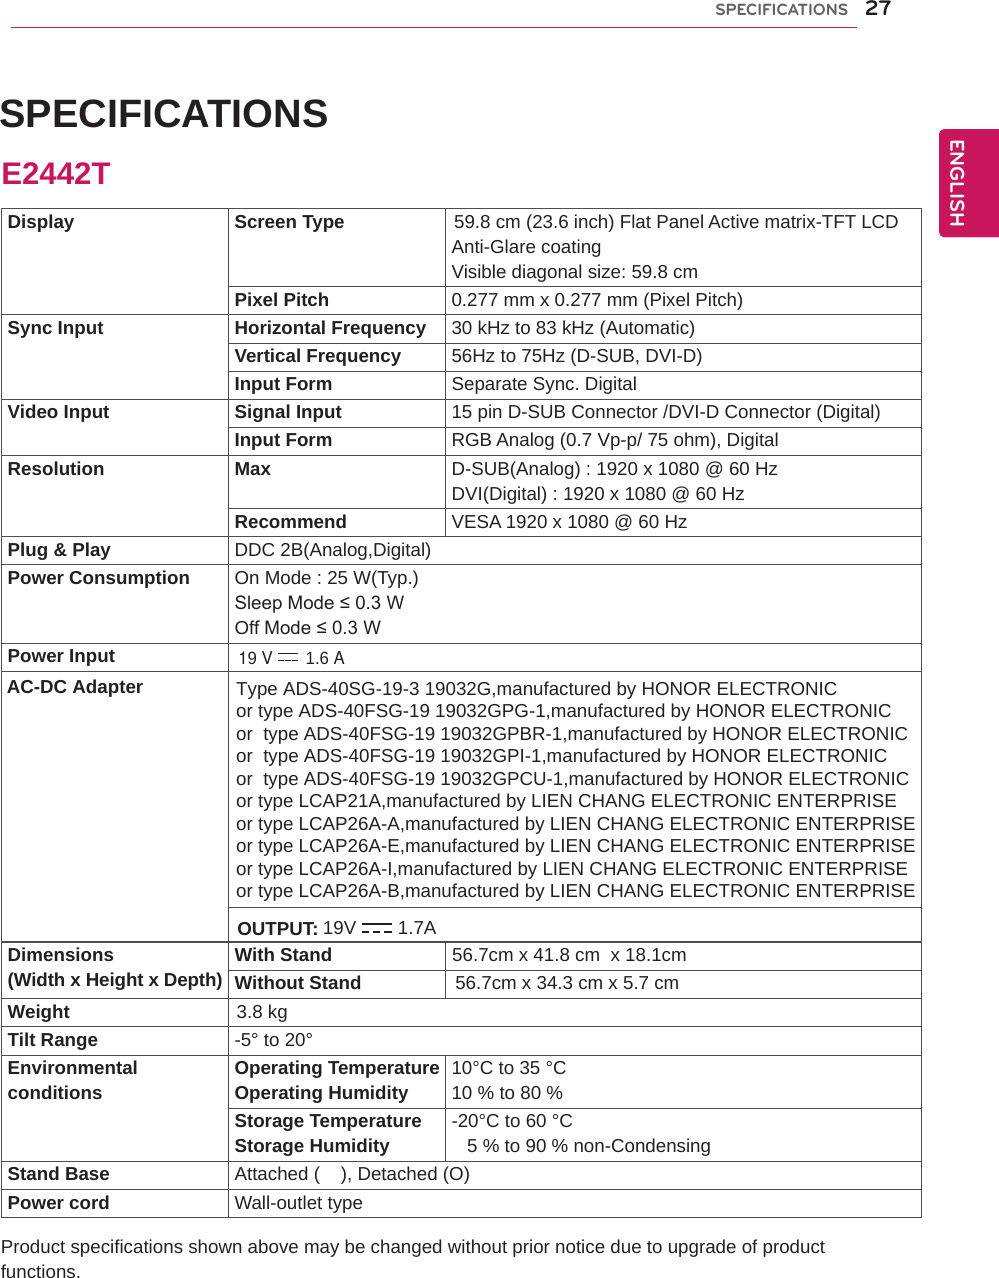 27ENGENGLISHSPECIFICATIONS SPECIFICATIONS Product specifications shown above may be changed without prior notice due to upgrade of product functions.Display Screen Type                     59.8 cm (23.6 inch) Flat Panel Active matrix-TFT LCDAnti-Glare coatingVisible diagonal size: 59.8 cmPixel Pitch 0.277 mm x 0.277 mm (Pixel Pitch)Sync Input Horizontal Frequency 30 kHz to 83 kHz (Automatic)Vertical Frequency 56Hz to 75Hz (D-SUB, DVI-D)Input Form Separate Sync. DigitalVideo Input Signal Input 15 pin D-SUB Connector /DVI-D Connector (Digital)Input Form RGB Analog (0.7 Vp-p/ 75 ohm), DigitalResolution Max D-SUB(Analog) : 1920 x 1080 @ 60 HzDVI(Digital) : 1920 x 1080 @ 60 HzRecommend VESA 1920 x 1080 @ 60 HzPlug &amp; Play DDC 2B(Analog,Digital)Power Consumption On Mode : 25 W(Typ.)Sleep Mode ≤ 0.3 W Off Mode ≤ 0.3 W Power InputDimensions(Width x Height x Depth) With Stand                       56.7cm x 41.8 cm  x 18.1cmWithout Stand                  56.7cm x 34.3 cm x 5.7 cmWeight                                3.8 kgTilt Range -5° to 20°Environmentalconditions Operating TemperatureOperating Humidity 10°C to 35 °C10 % to 80 % Storage TemperatureStorage Humidity -20°C to 60 °C   5 % to 90 % non-CondensingStand Base Attached (    ), Detached (O)Power cord Wall-outlet typeE2442T19 V 1.6 A AC-DC Adapter19V 1.7AType ADS-40SG-19-3 19032G,manufactured by HONOR ELECTRONICor type ADS-40FSG-19 19032GPG-1,manufactured by HONOR ELECTRONICor  type ADS-40FSG-19 19032GPBR-1,manufactured by HONOR ELECTRONICor  type ADS-40FSG-19 19032GPI-1,manufactured by HONOR ELECTRONIC or  type ADS-40FSG-19 19032GPCU-1,manufactured by HONOR ELECTRONIC or type LCAP21A,manufactured by LIEN CHANG ELECTRONIC ENTERPRISEor type LCAP26A-A,manufactured by LIEN CHANG ELECTRONIC ENTERPRISEor type LCAP26A-E,manufactured by LIEN CHANG ELECTRONIC ENTERPRISEor type LCAP26A-I,manufactured by LIEN CHANG ELECTRONIC ENTERPRISEor type LCAP26A-B,manufactured by LIEN CHANG ELECTRONIC ENTERPRISEOUTPUT: